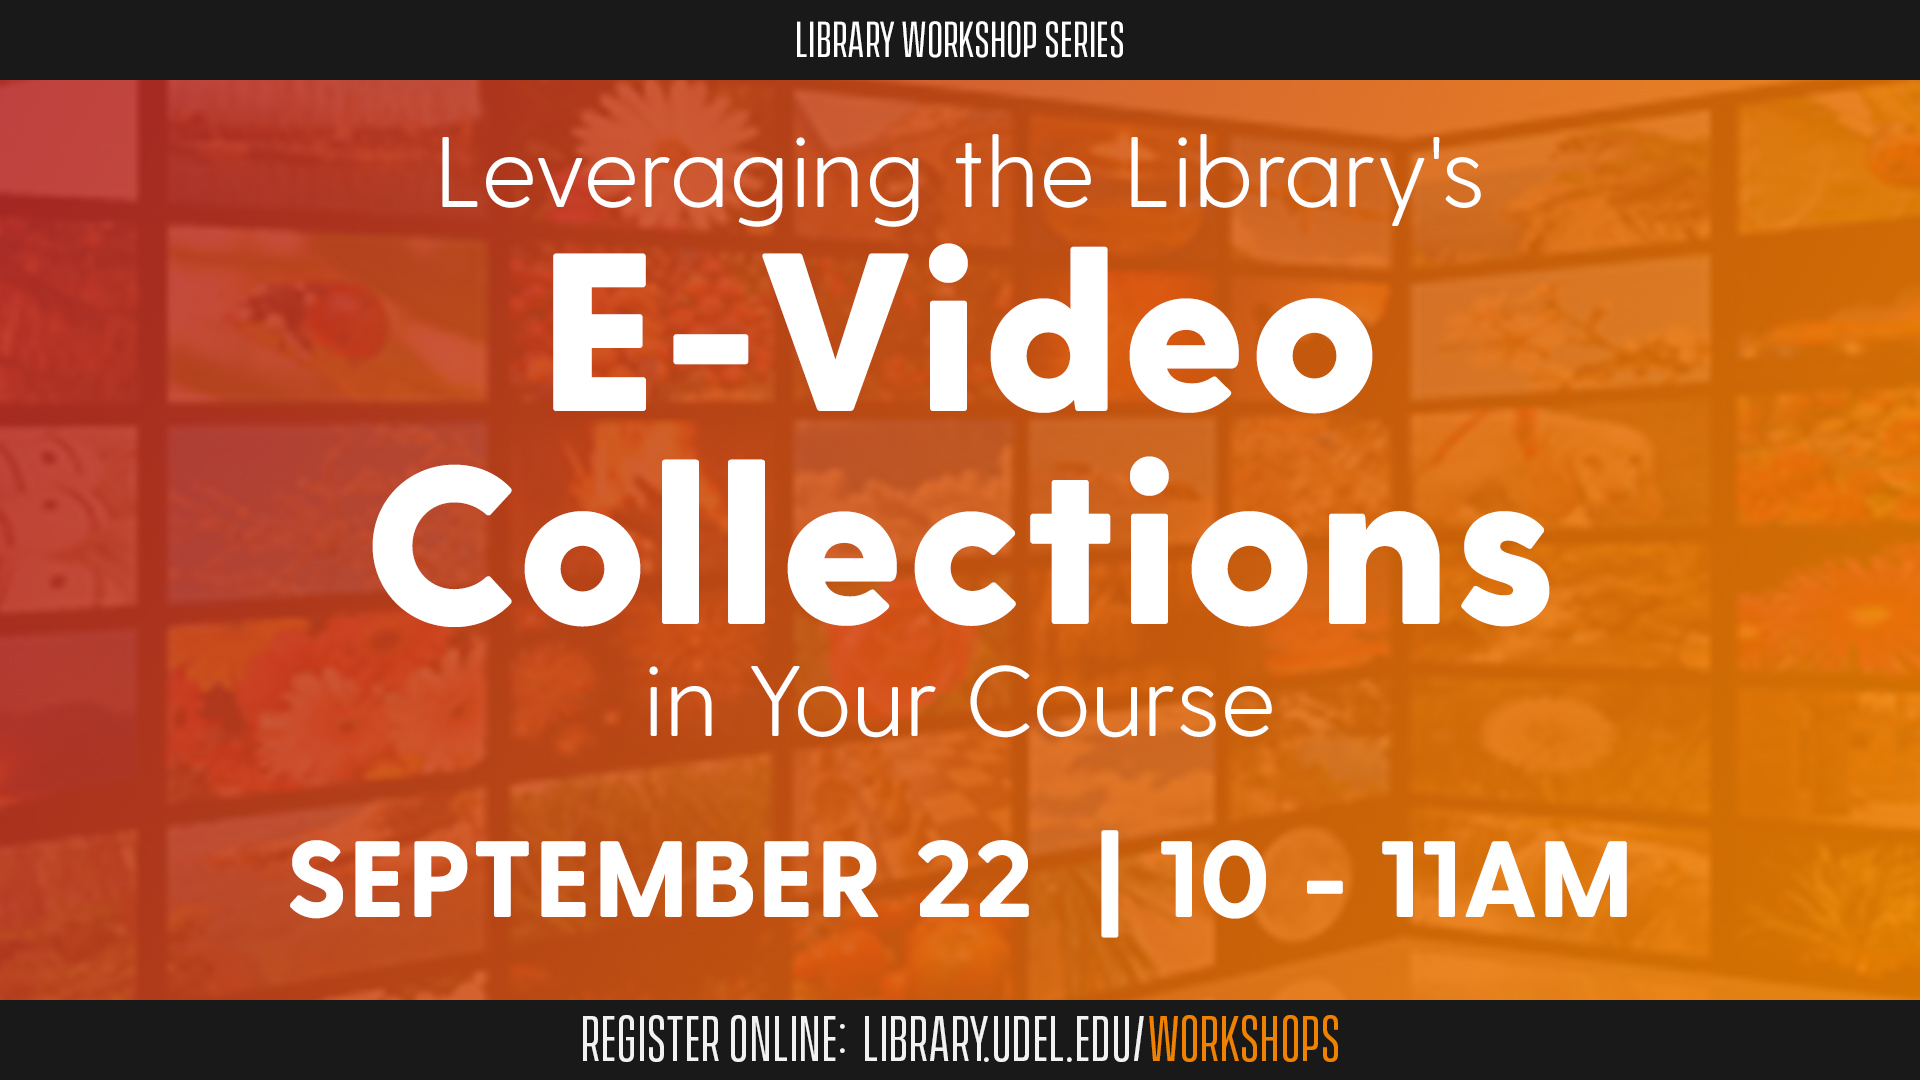 Leveraging the Library's E-video Collections in Your Course